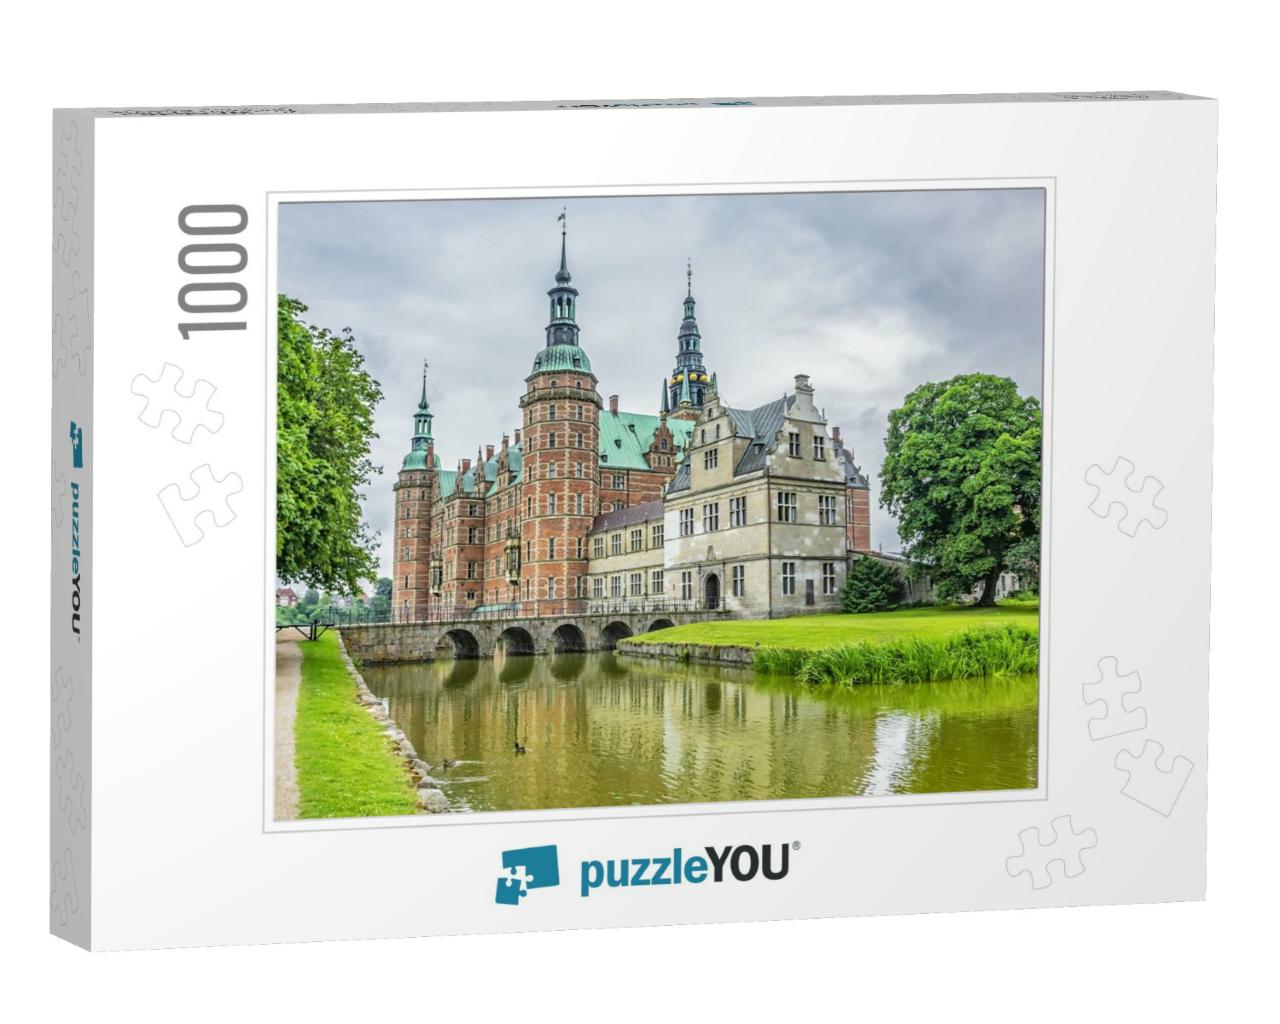 External View of Frederiksborg Castle Frederiksborg Slot... Jigsaw Puzzle with 1000 pieces